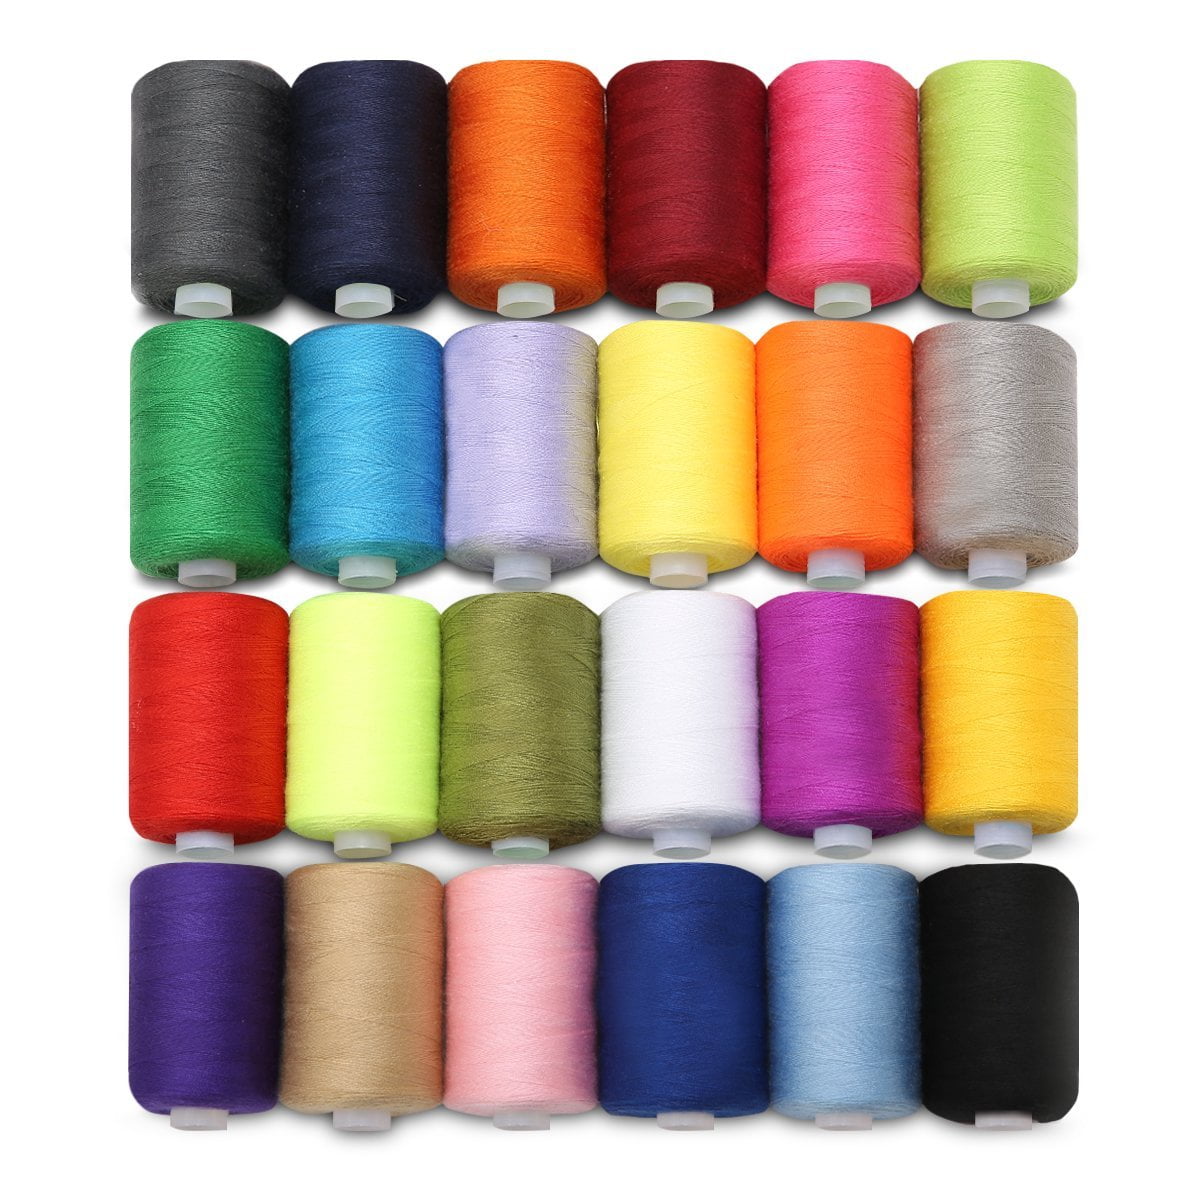 10pcs Sewing Threads Kits 200 Yards Per Spool Polyester Threads Sewing Tool  Diy Craft Hand Machine Sewing Embroidery Accessories - Sewing Threads -  AliExpress